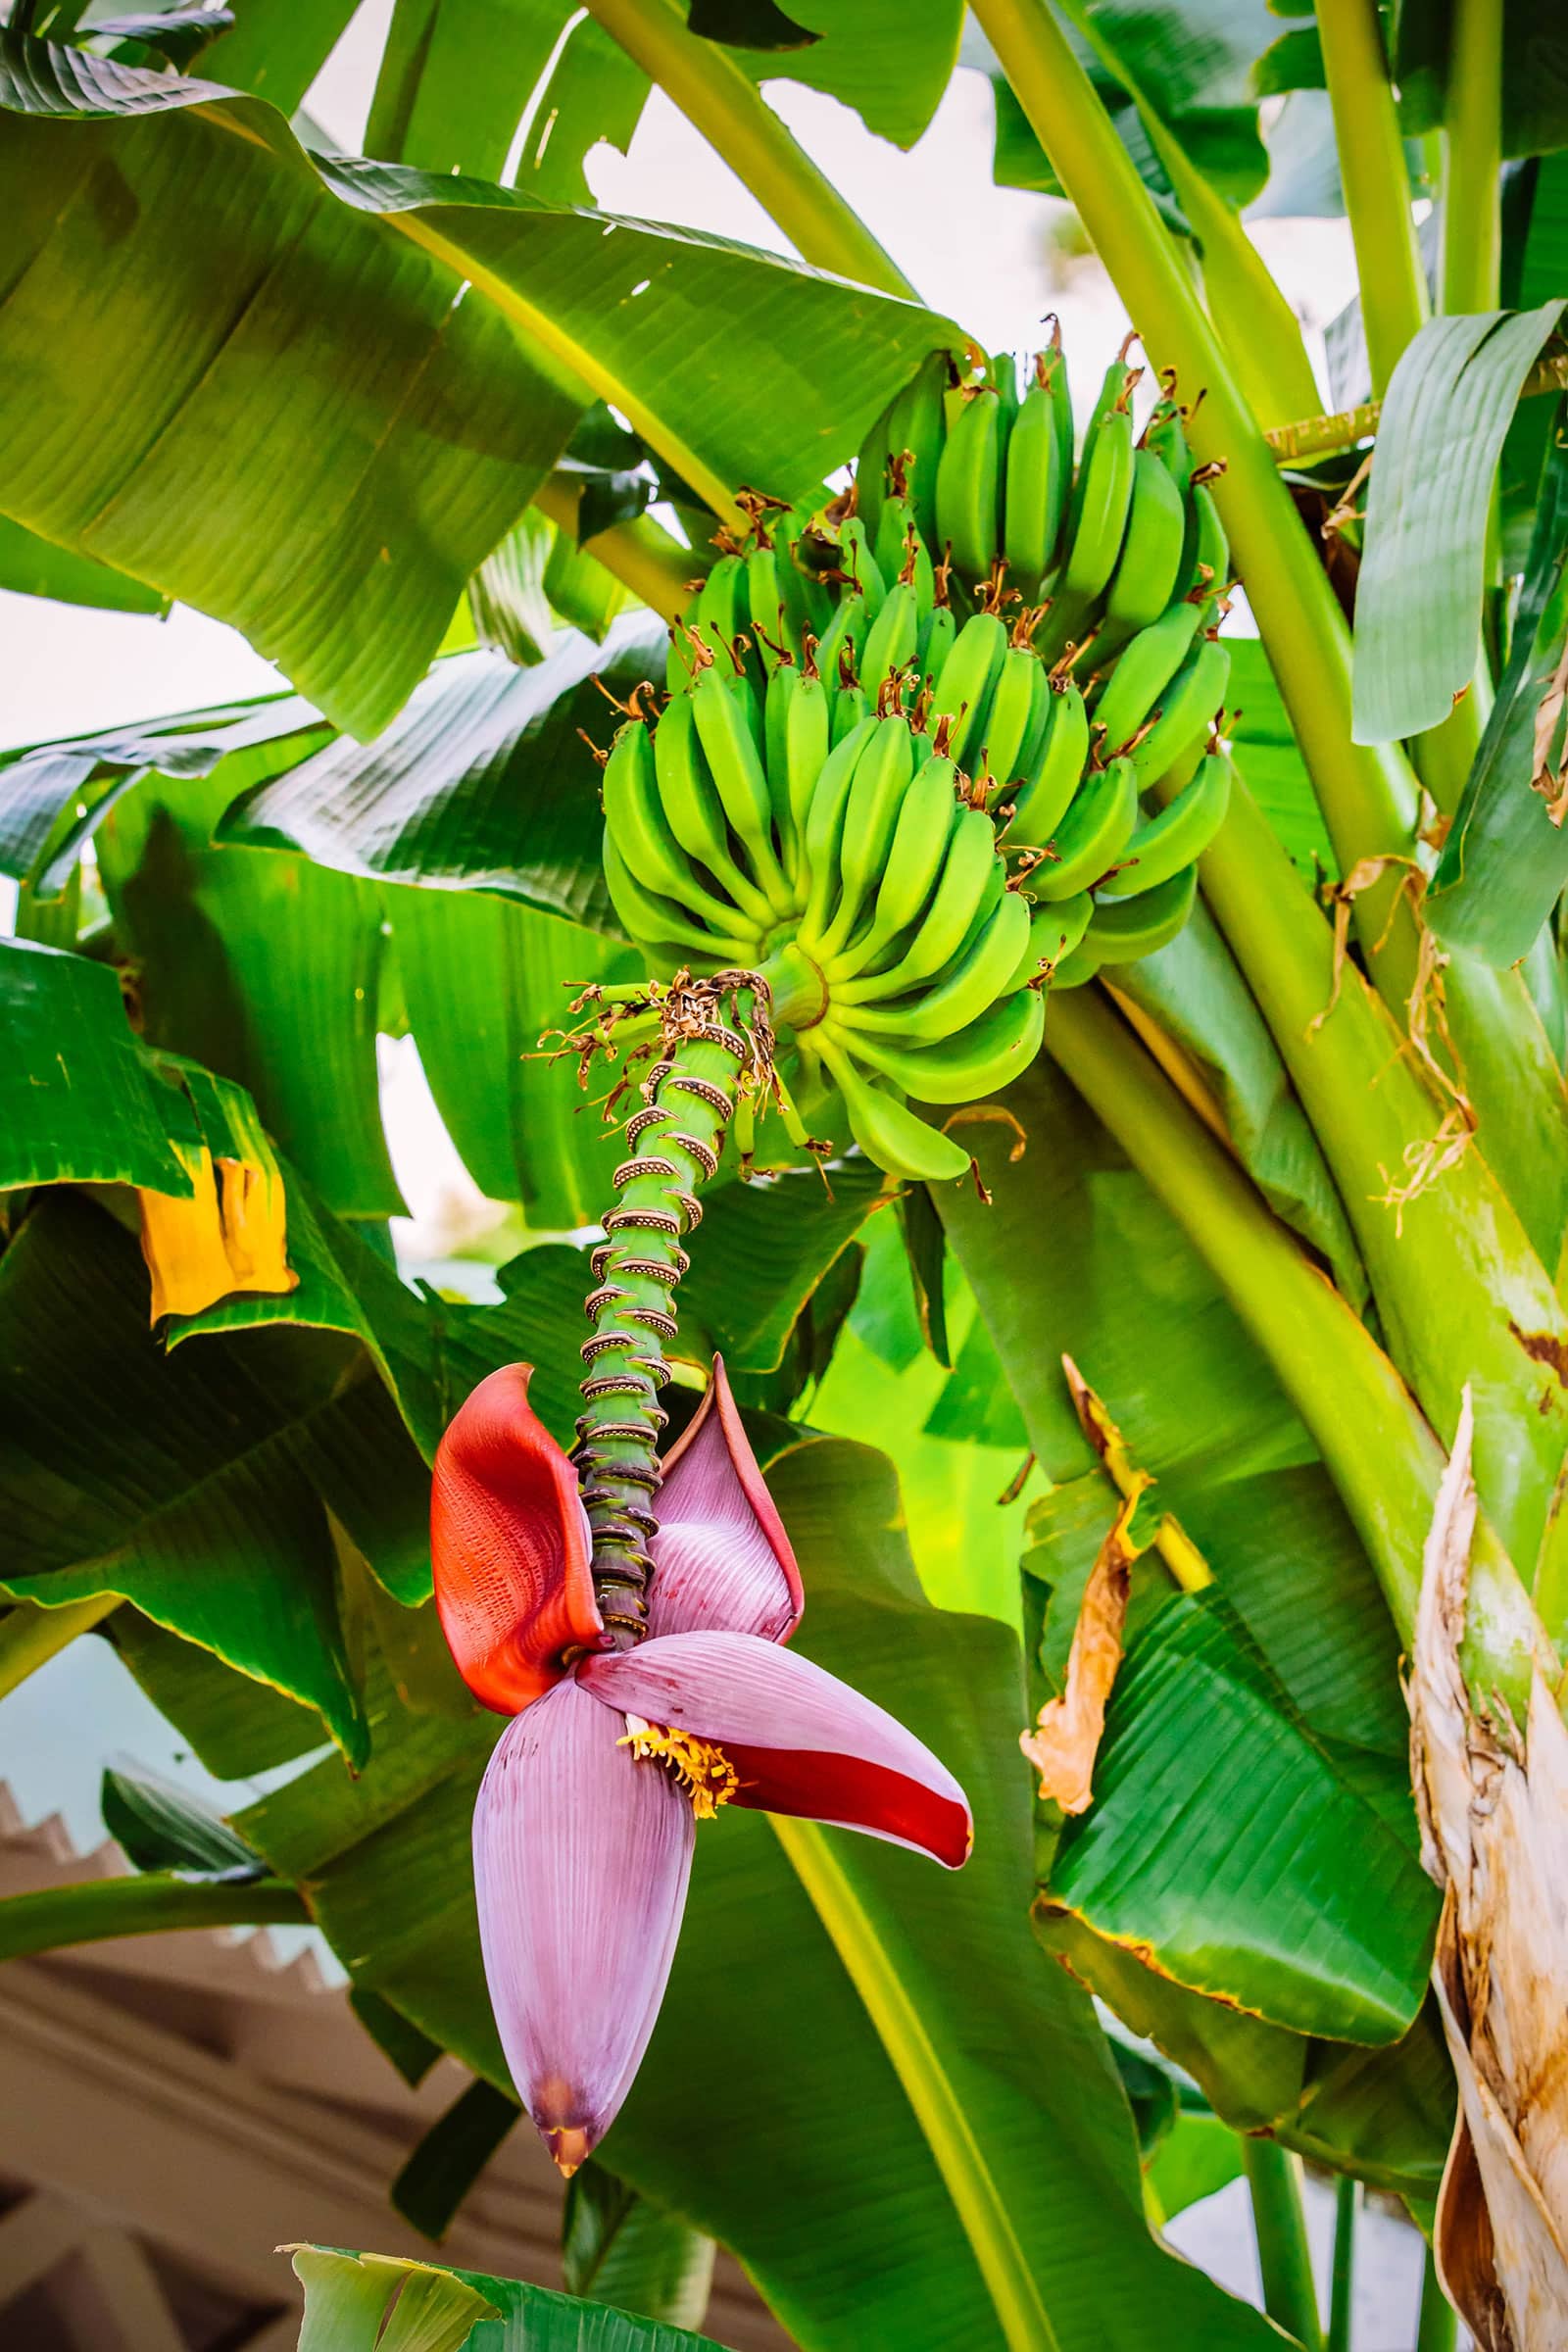 A large bunch of green bananas hanging down from a banana stalk with a banana flower on the end